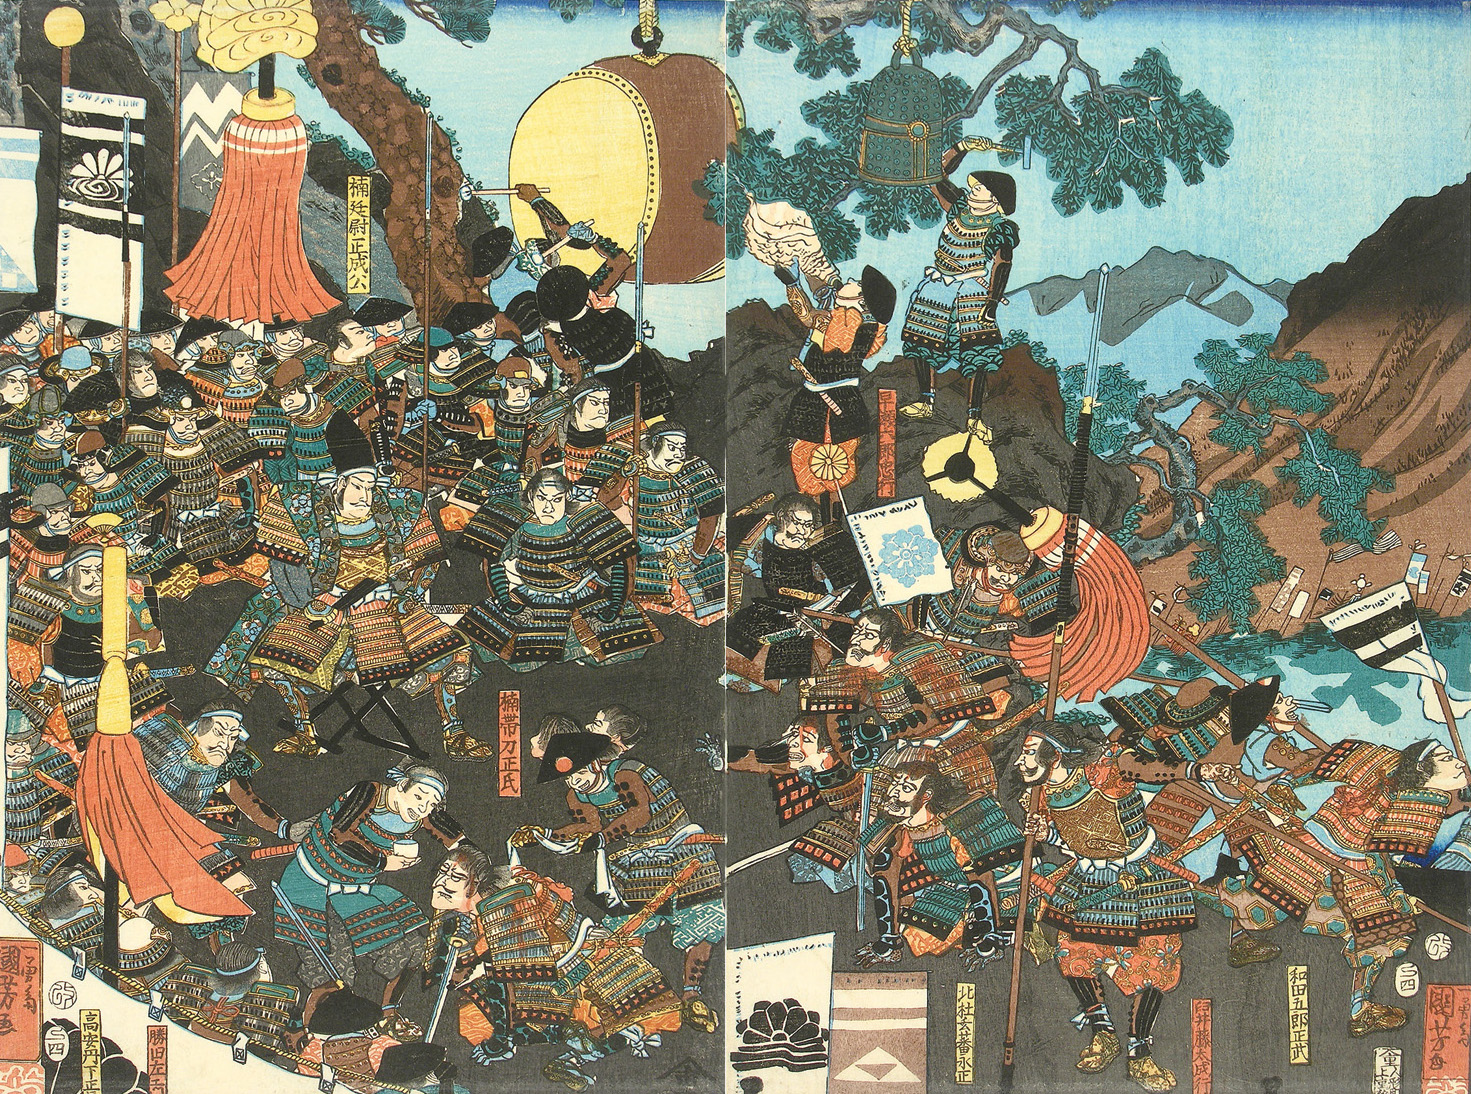 Masashige rallies his men in the Battle of Minatogawa in 1336. Despite their valor, Masashige and his fellow samurai were defeated. Surrounded and bleeding from 11 wounds, the great warrior and his brother committed suicide together.